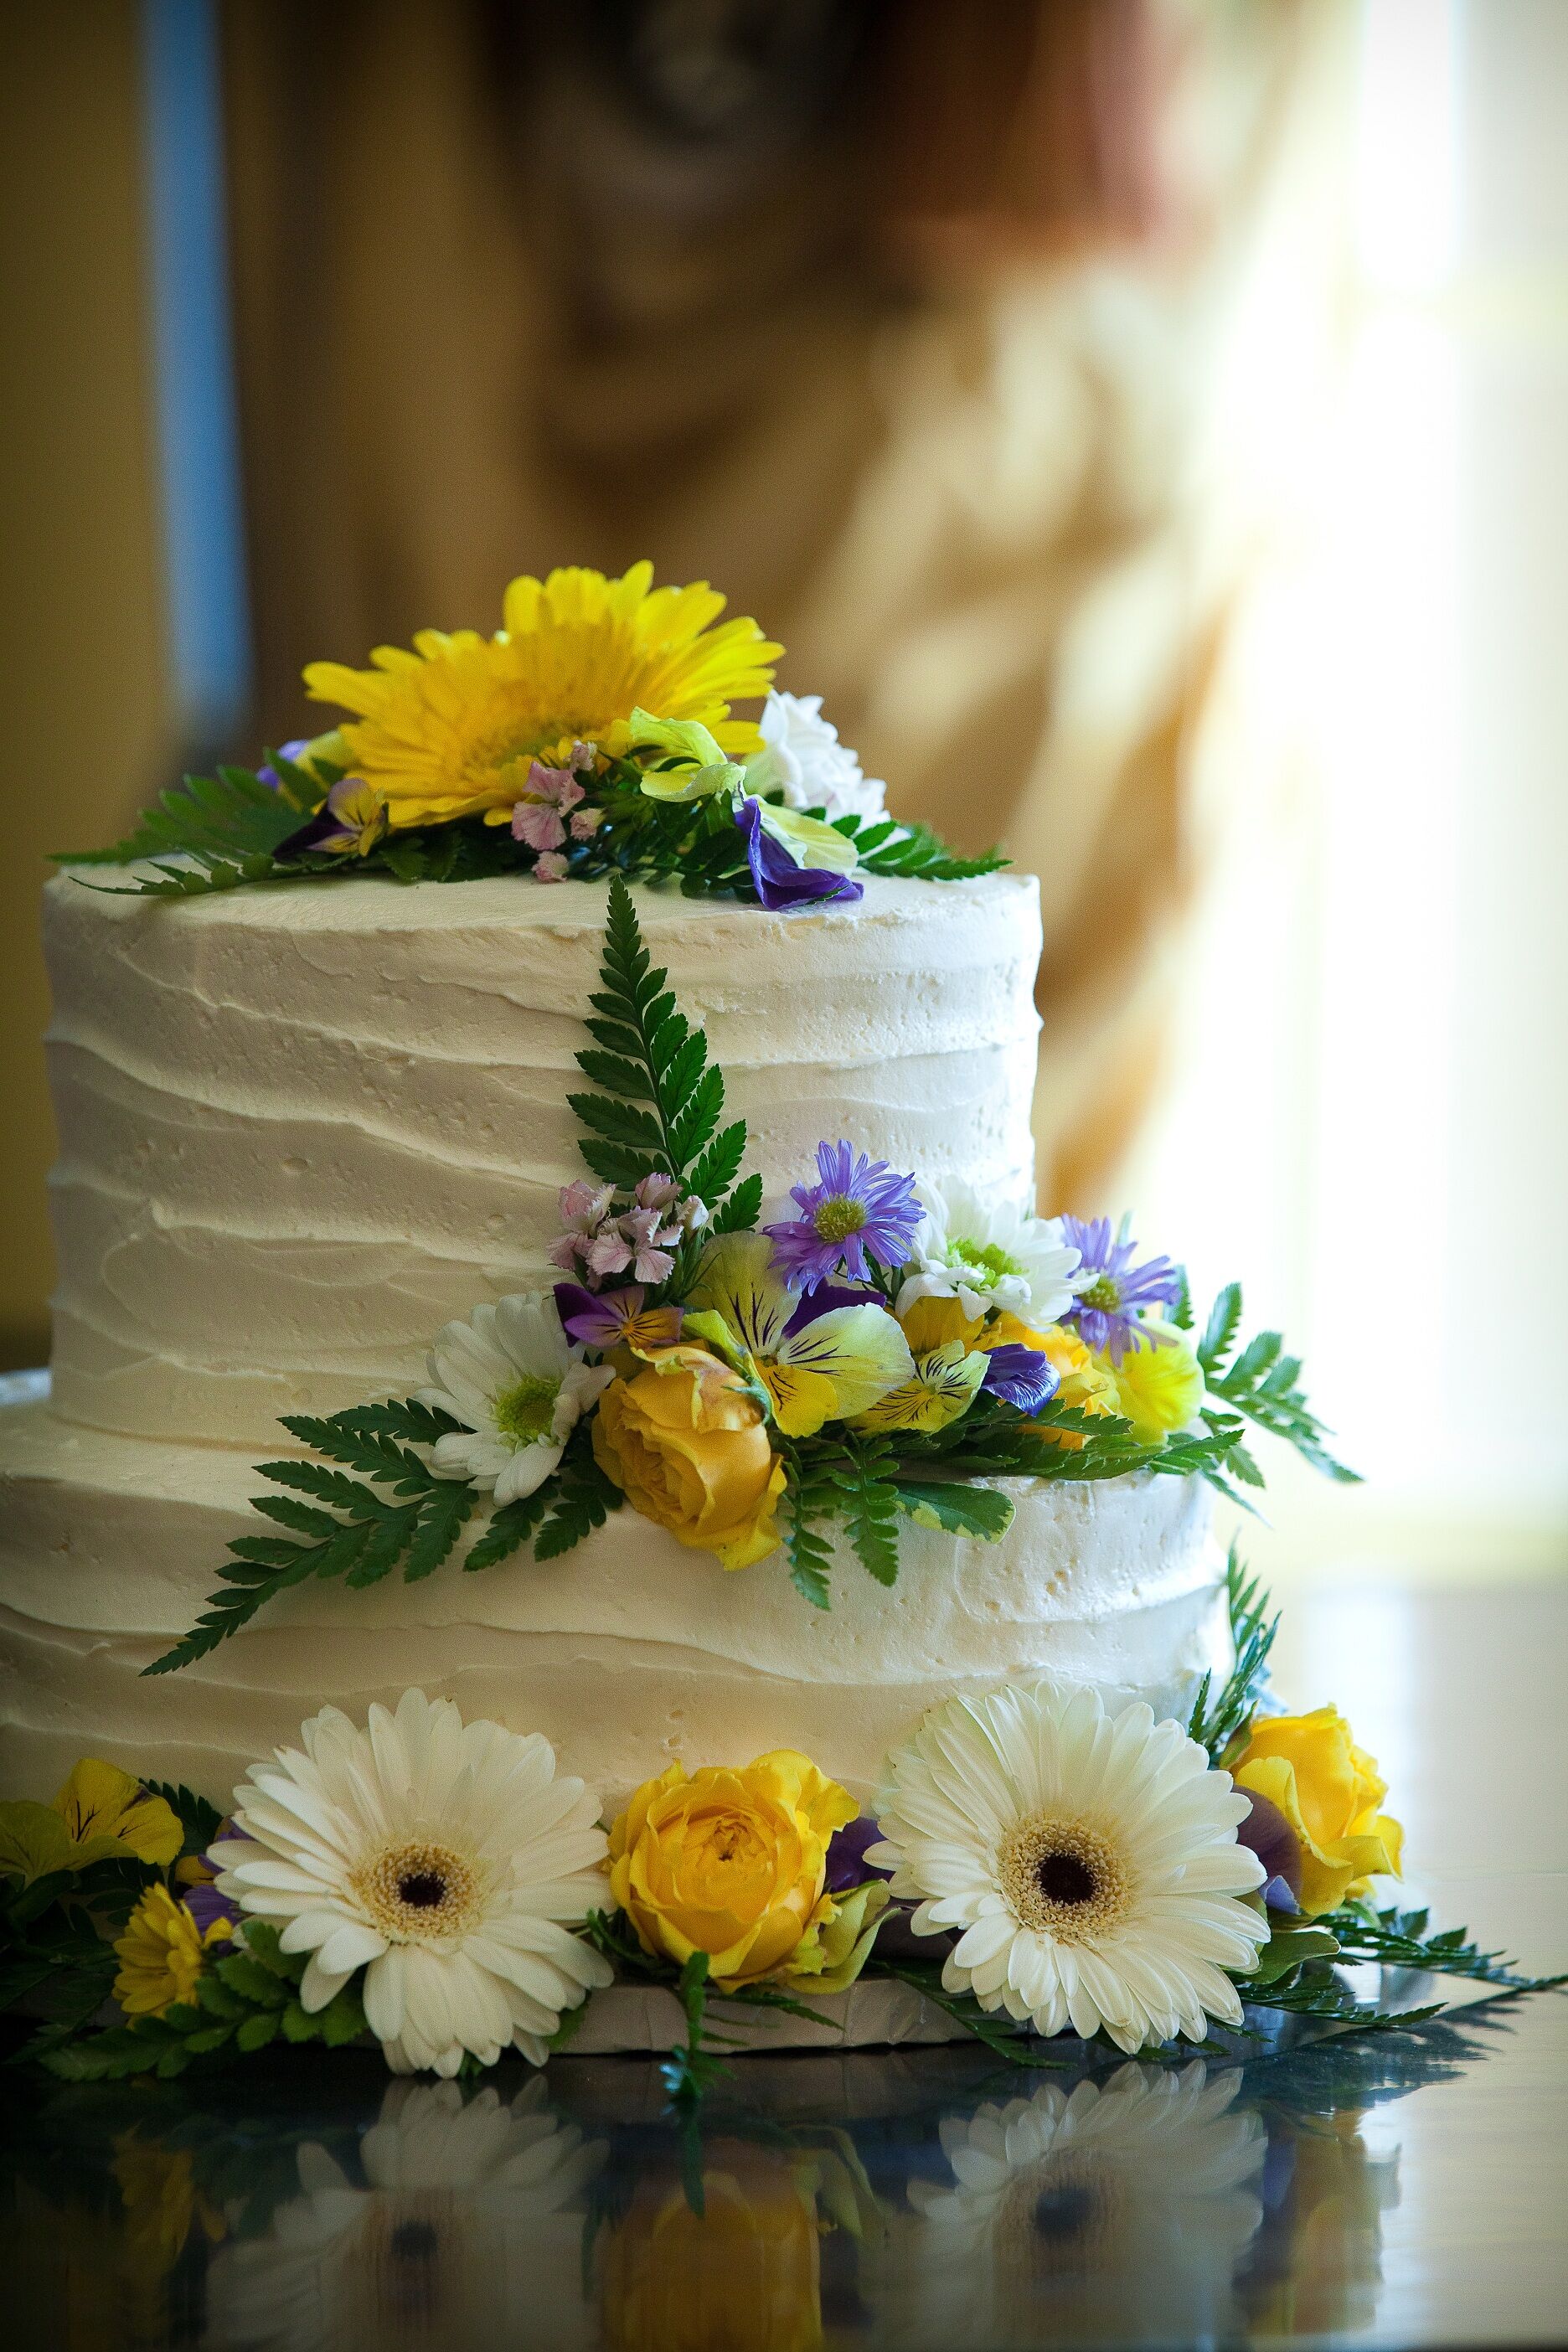 The Bake More: Gold Engagement Cake with Peonies – Edible Gold Paint,  Gunging and Easy Ruffled Cake Drum